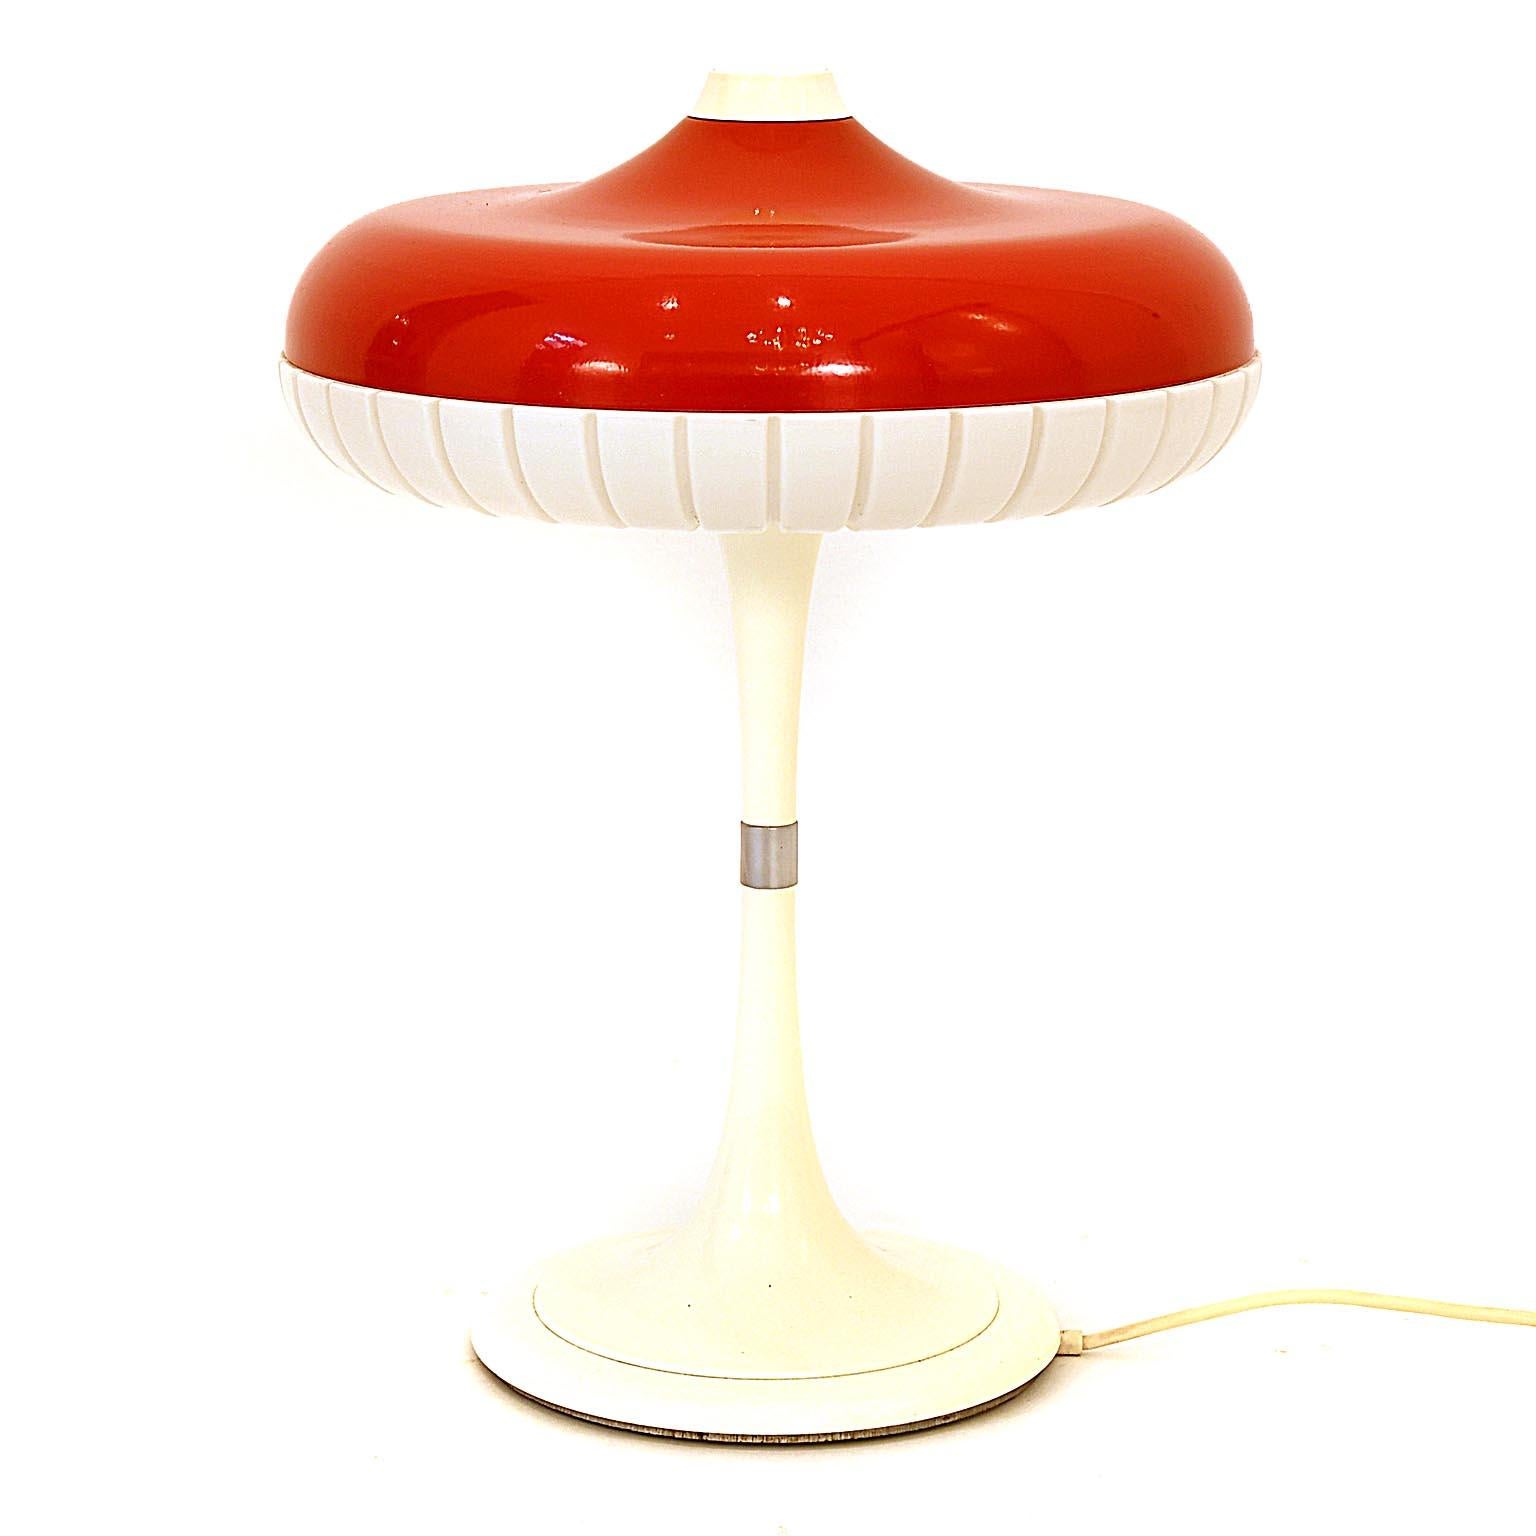 Table lamp designed by Siemens, circa 1960s. Red plastic shade with a white cast iron base. Located on the top is the on/off switch.
Fine original condition. Flourescent lamp 32 watt. The lamp is branded with paper label inside.